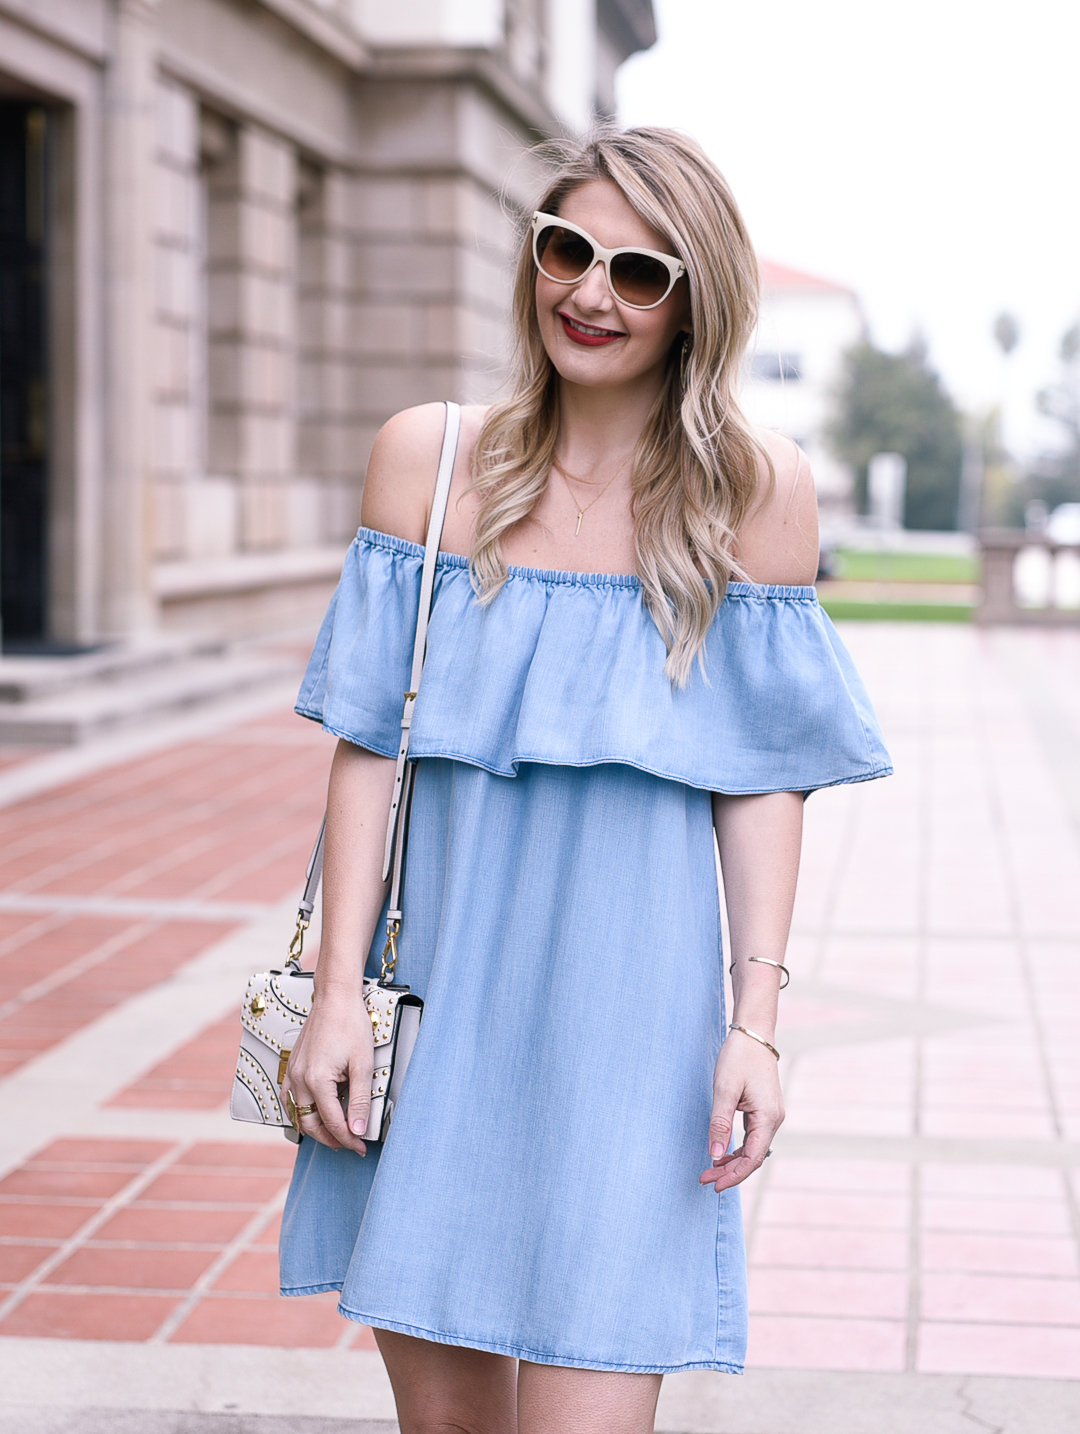 Twirling in this lightweight denim dress with a cute ruffle hem.